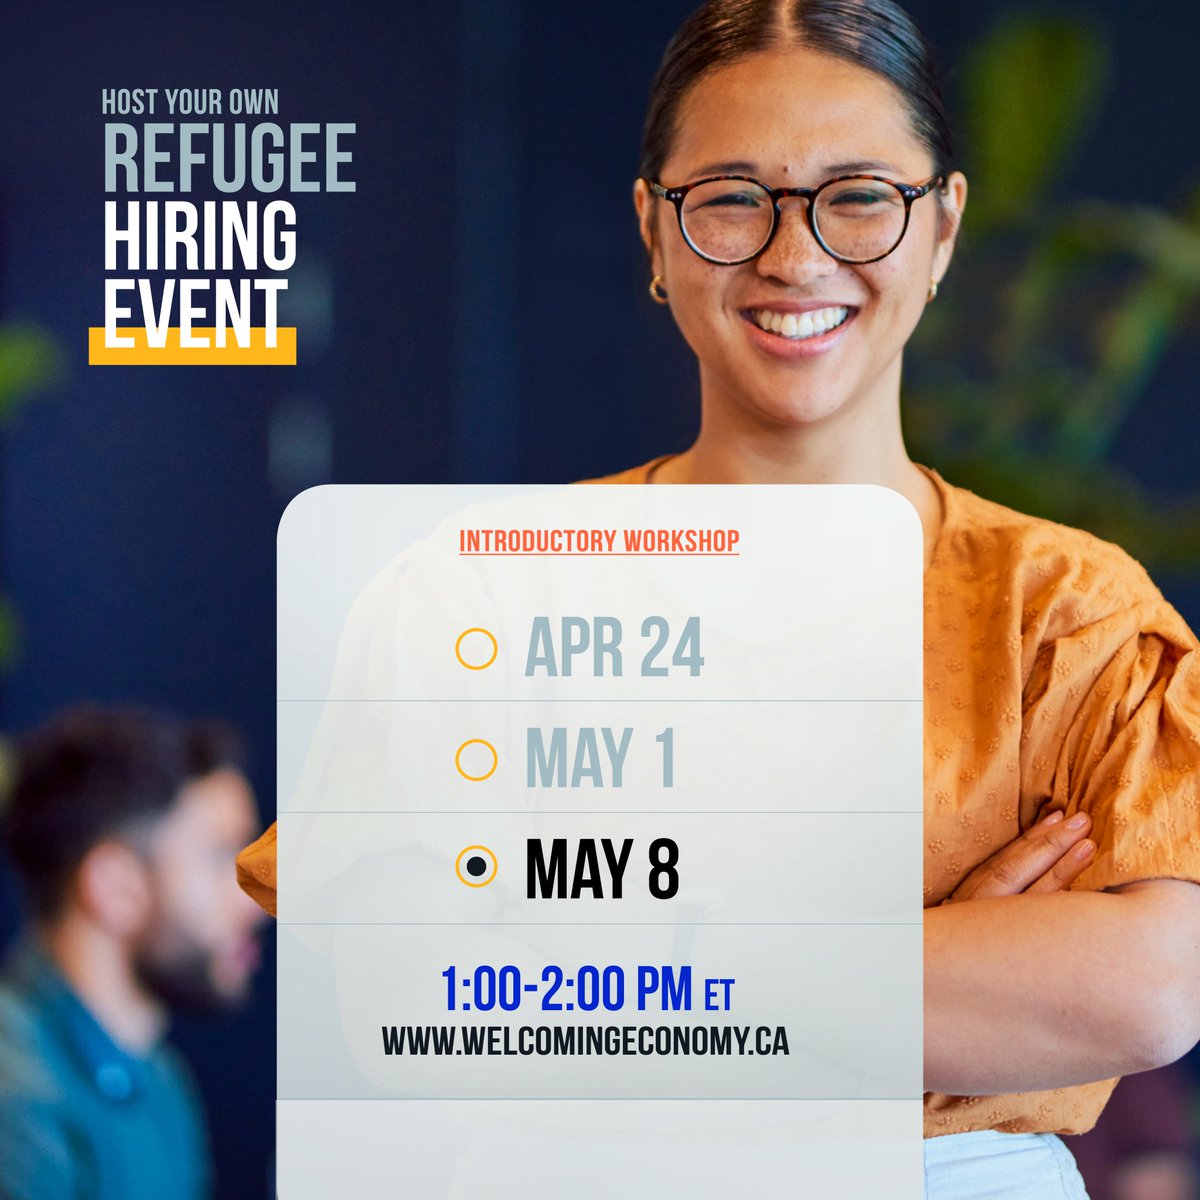 Municipalities, settlement agencies, and employers can run hiring events for #refugees in their own communities. Learn how in this Introductory Workshop from #WelcomingEconomy!

Register: bit.ly/we-training-20…

#RefugeesWelcome
#WithRefugees